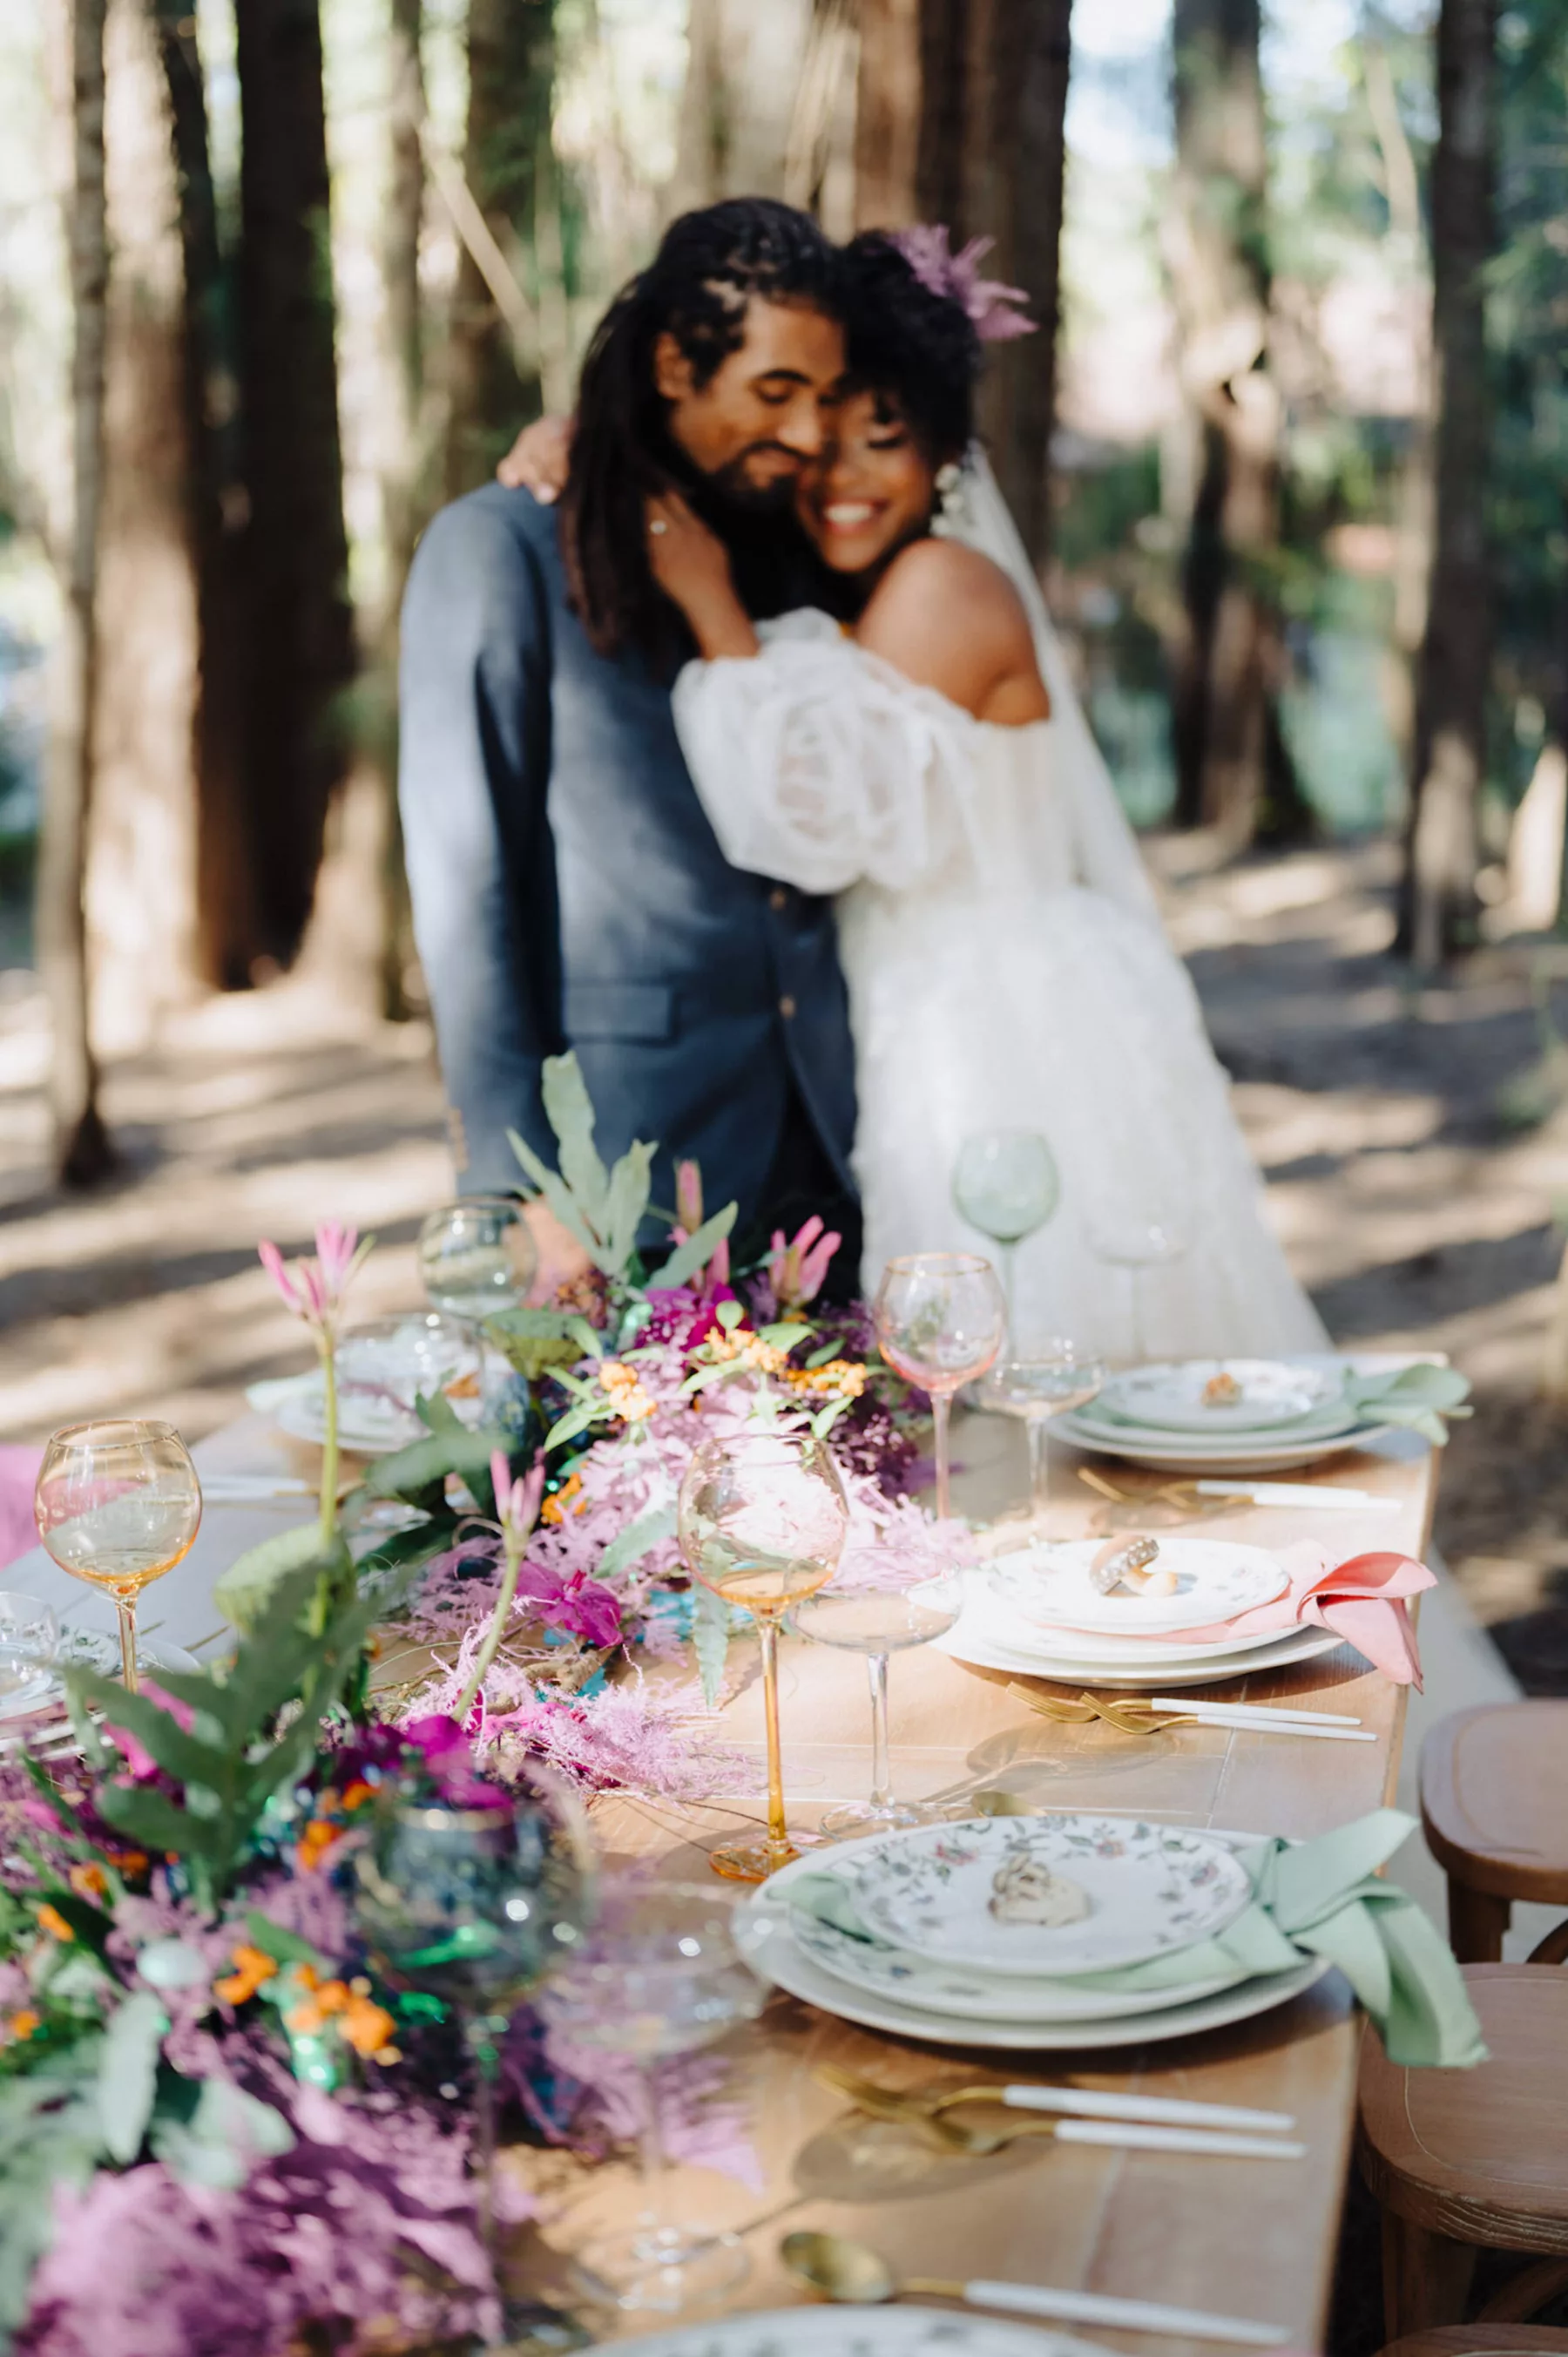 Whimsical Forest Wedding Reception Tablescape Ideas | Tampa Bay Planner Wilder Mind Events | Photographer McNeile Photography | Content Creator Behind The Vows | Outdoor Private Estate Wedding Venue Royal Pine Estate